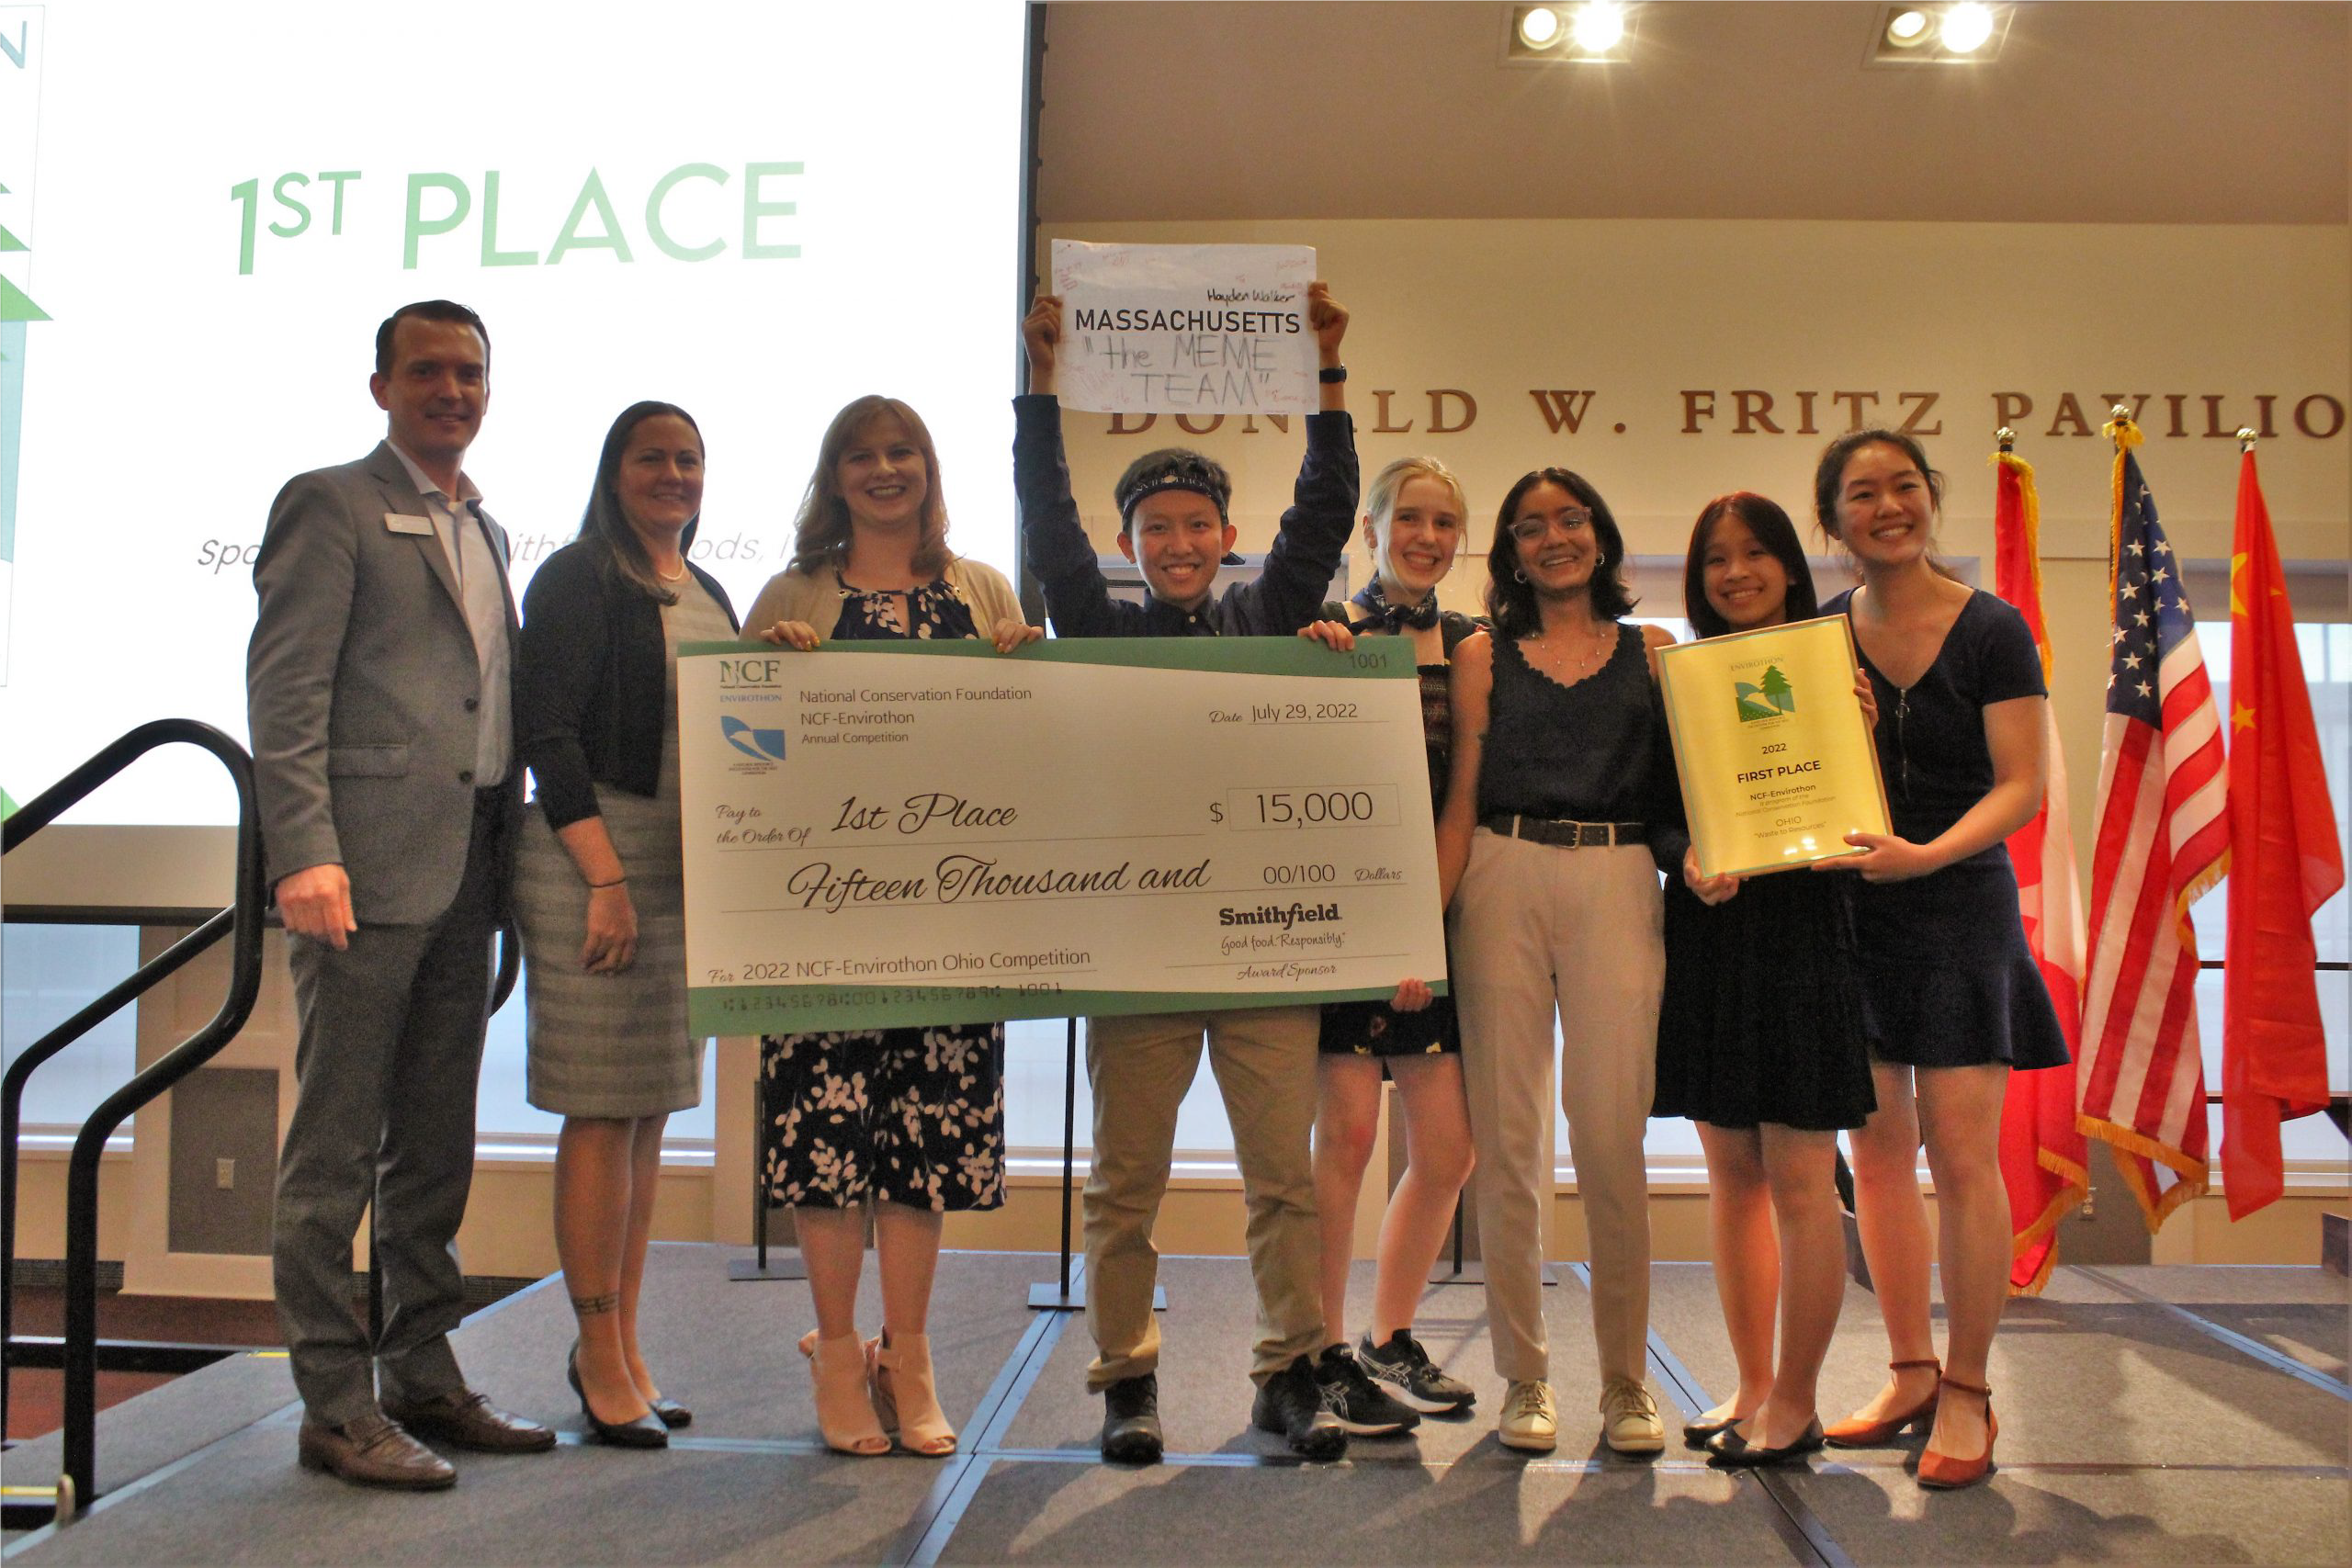 Congratulations to Lexington Envirothon Team named Champion of the 2022 National Conservation Foundation ENVIROTHON Event!